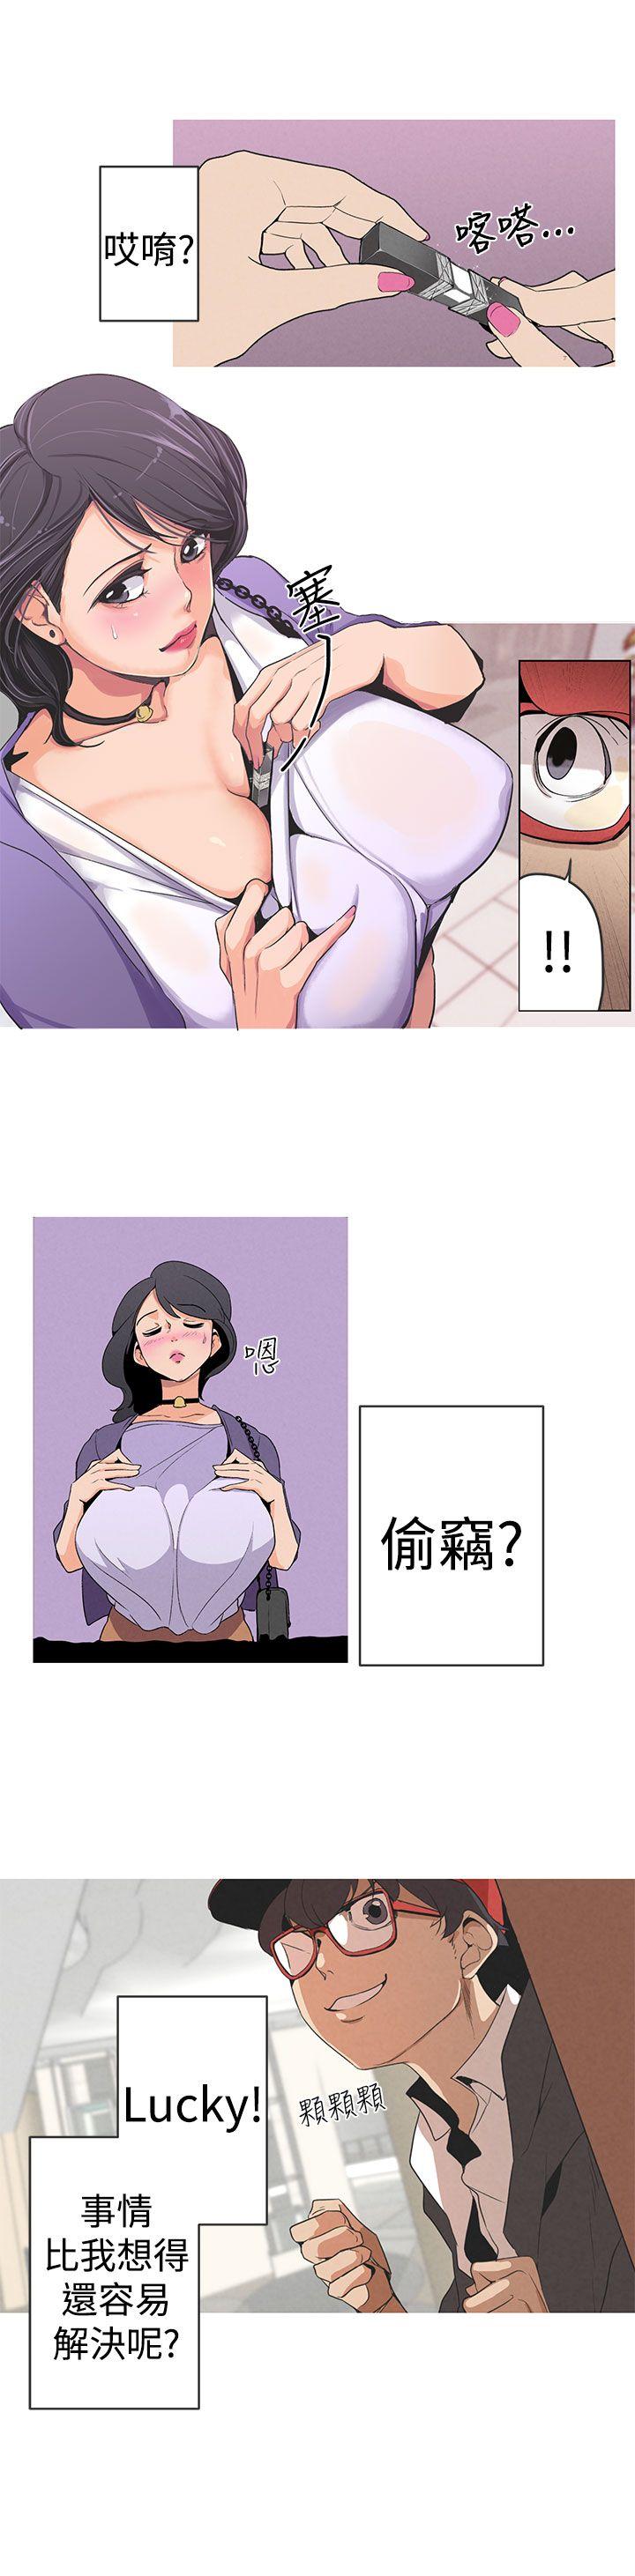 Twink 女神狩猎 第1話 [Chinese]中文 Best Blowjob Ever - Page 6